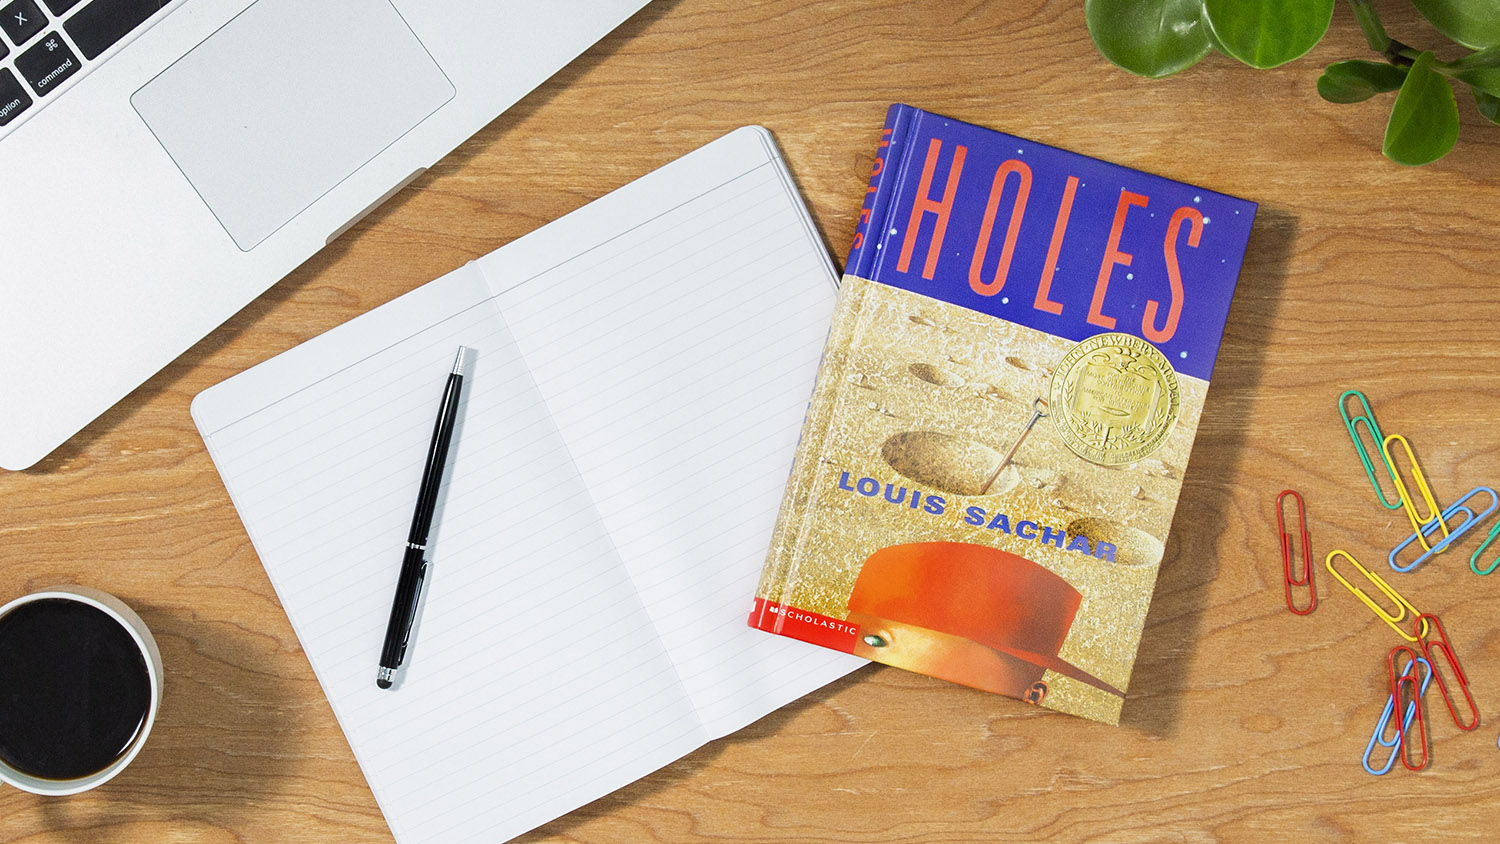 Books like Small Steps(Holes) by Louis Sachar